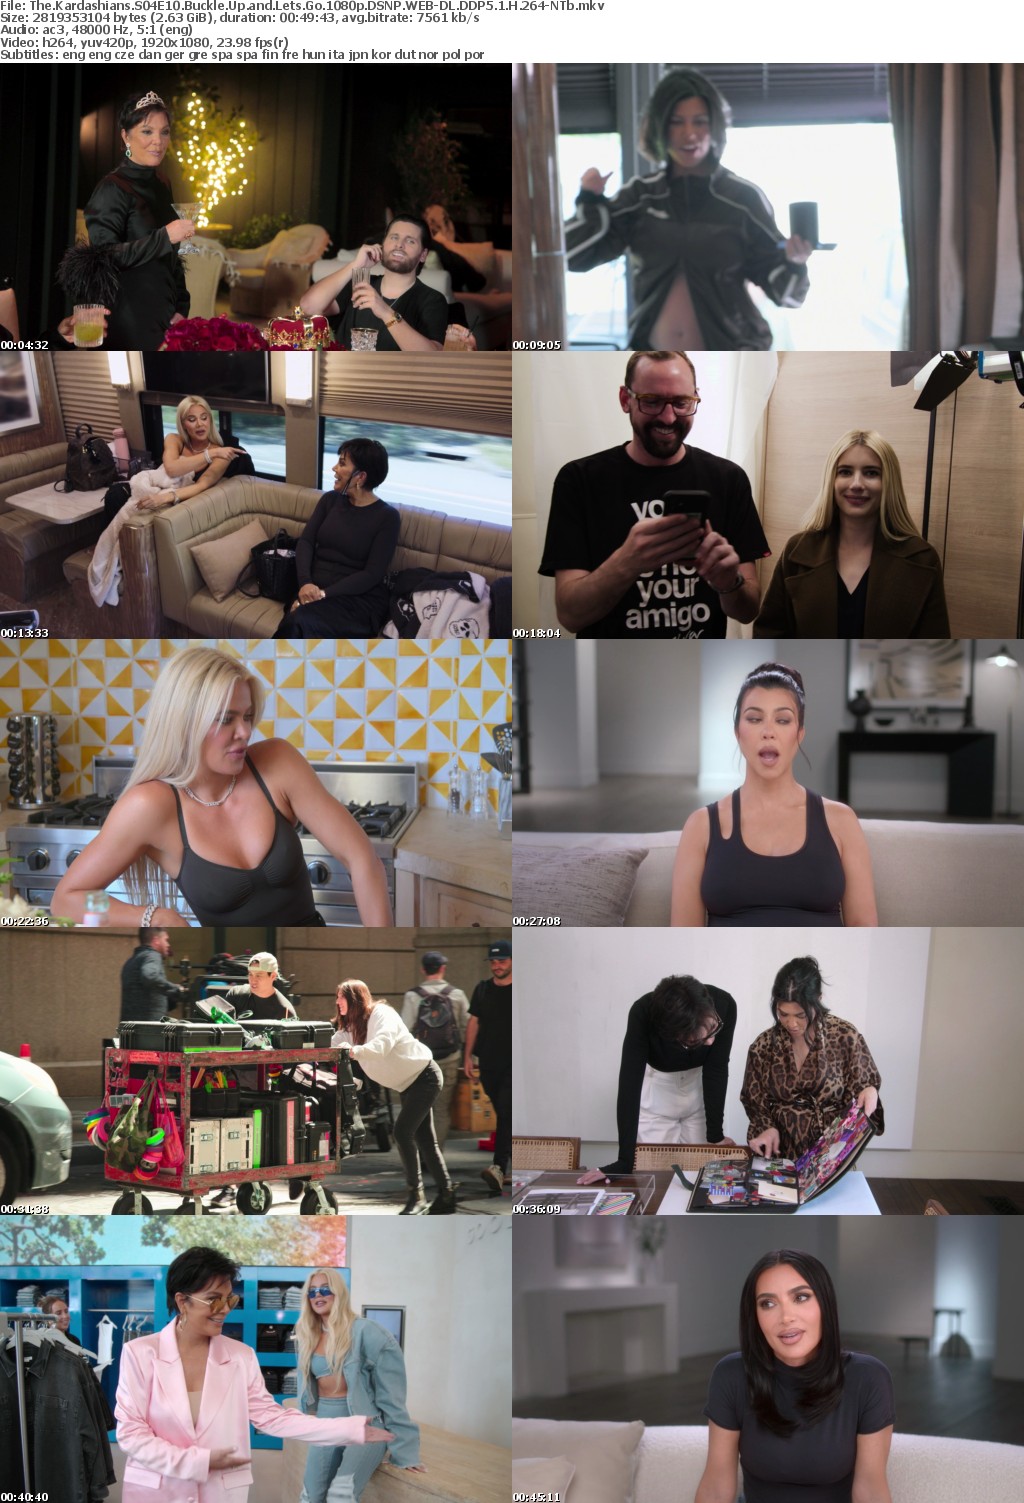 The Kardashians S04E10 Buckle Up and Lets Go 1080p DSNP WEB-DL DDP5 1 H 264-NTb